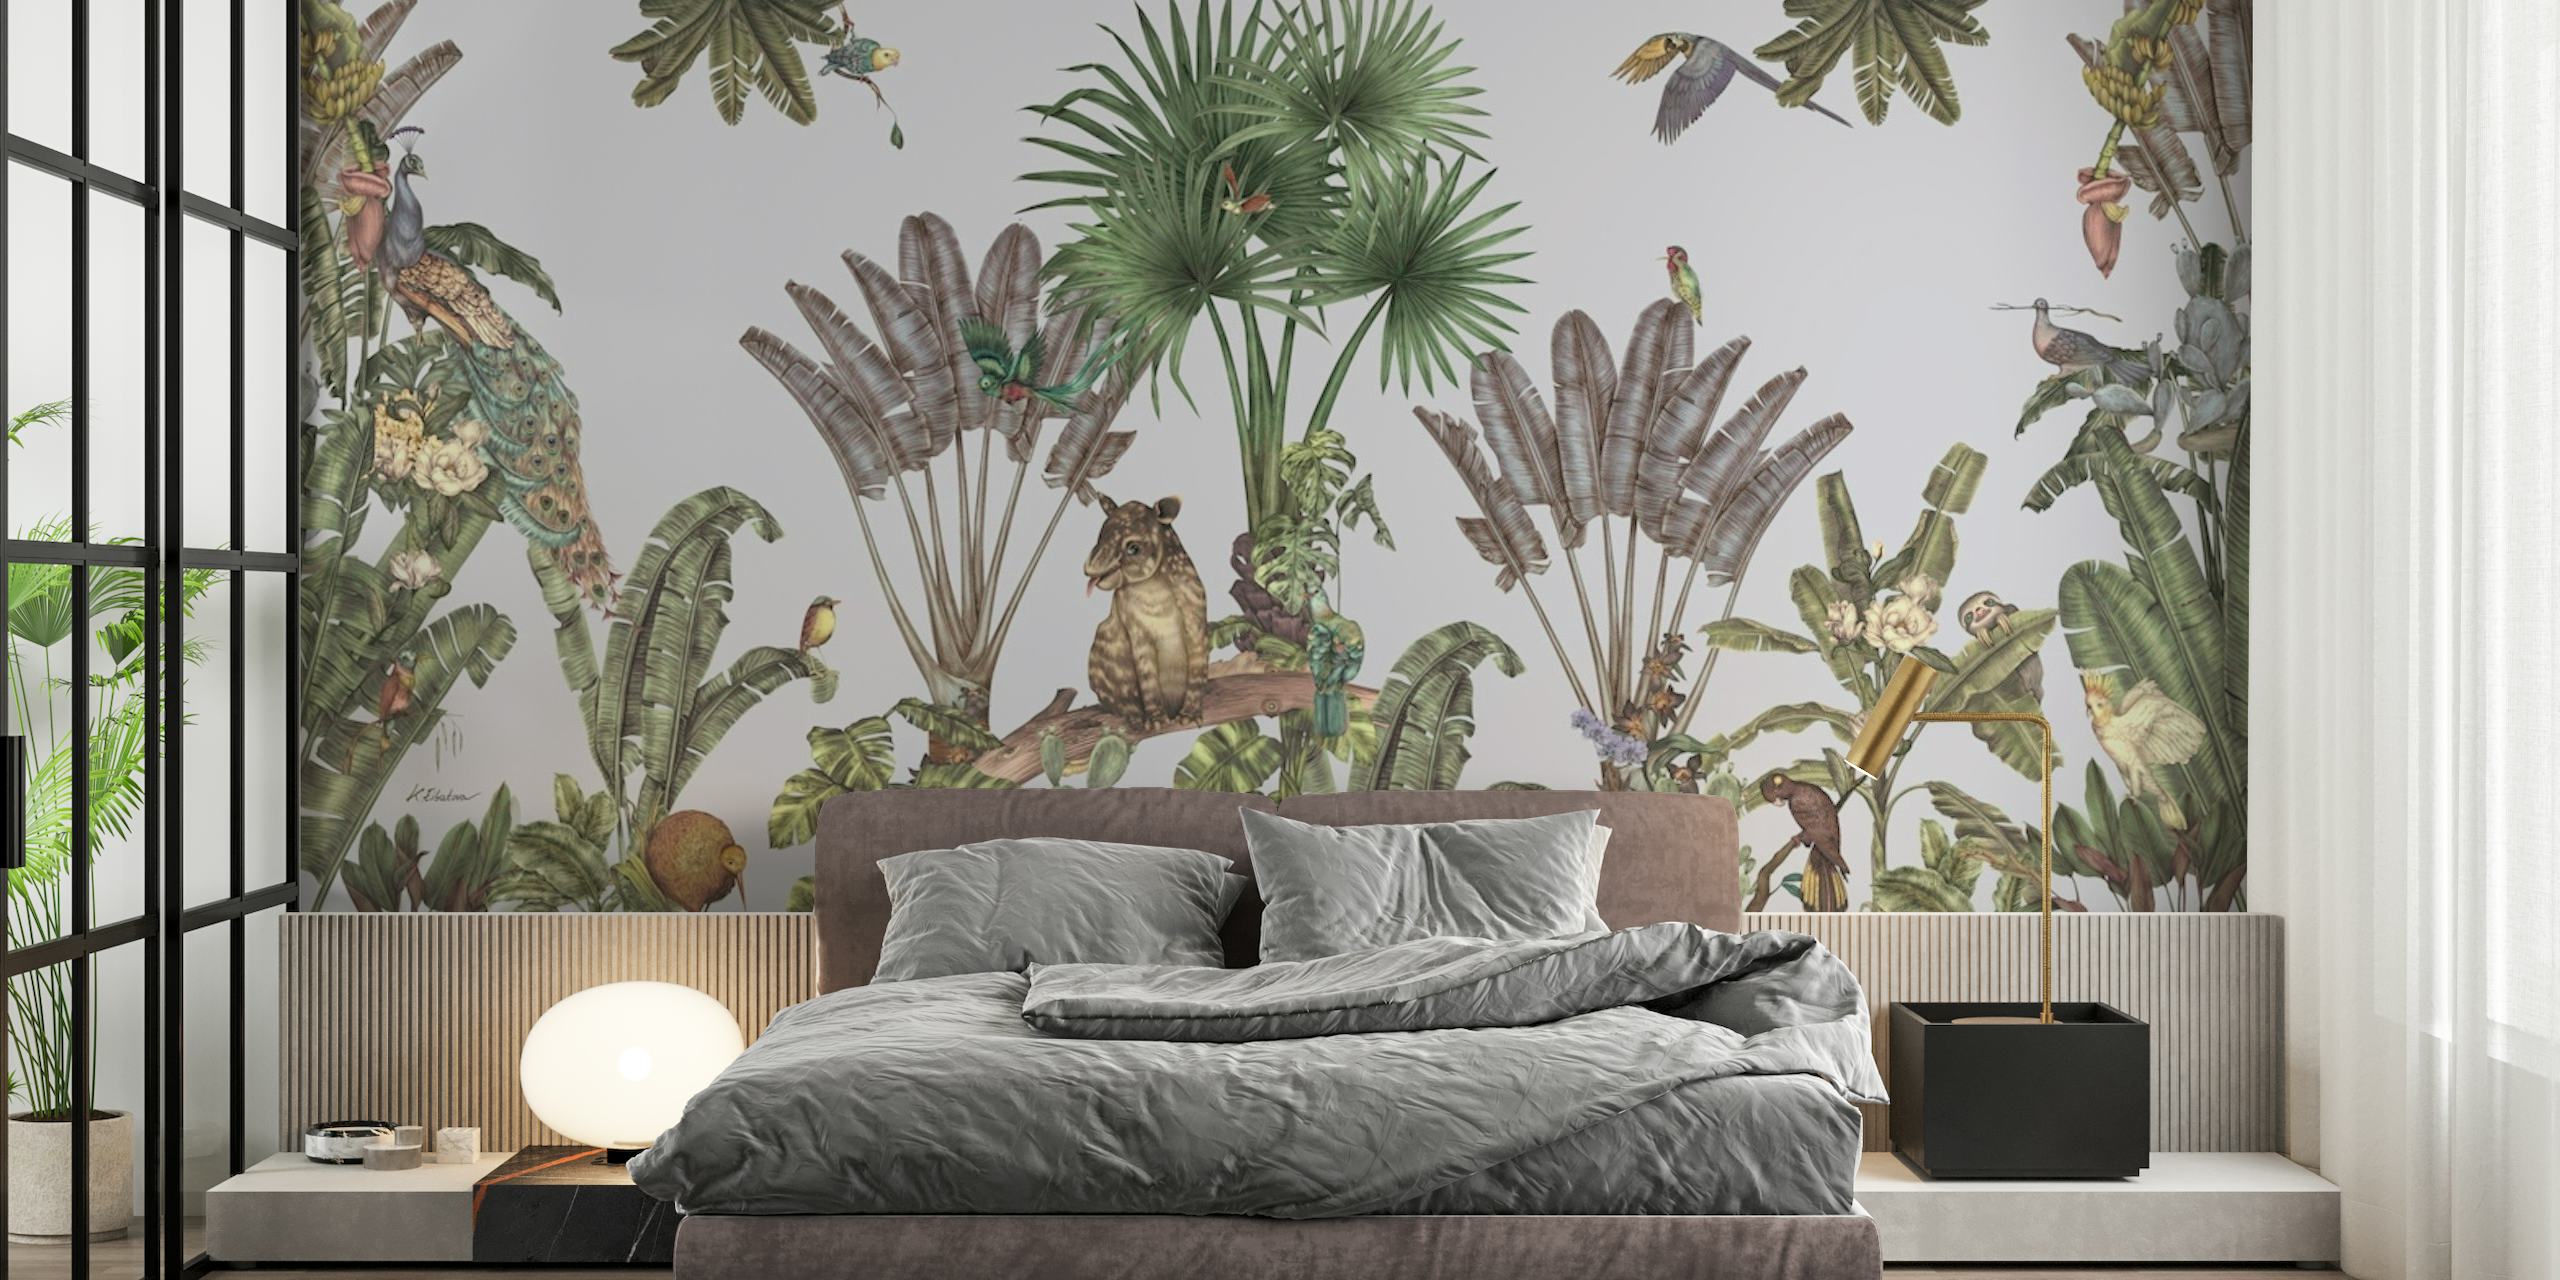 Light blue nursery wall mural featuring a baby tapir and tropical plants